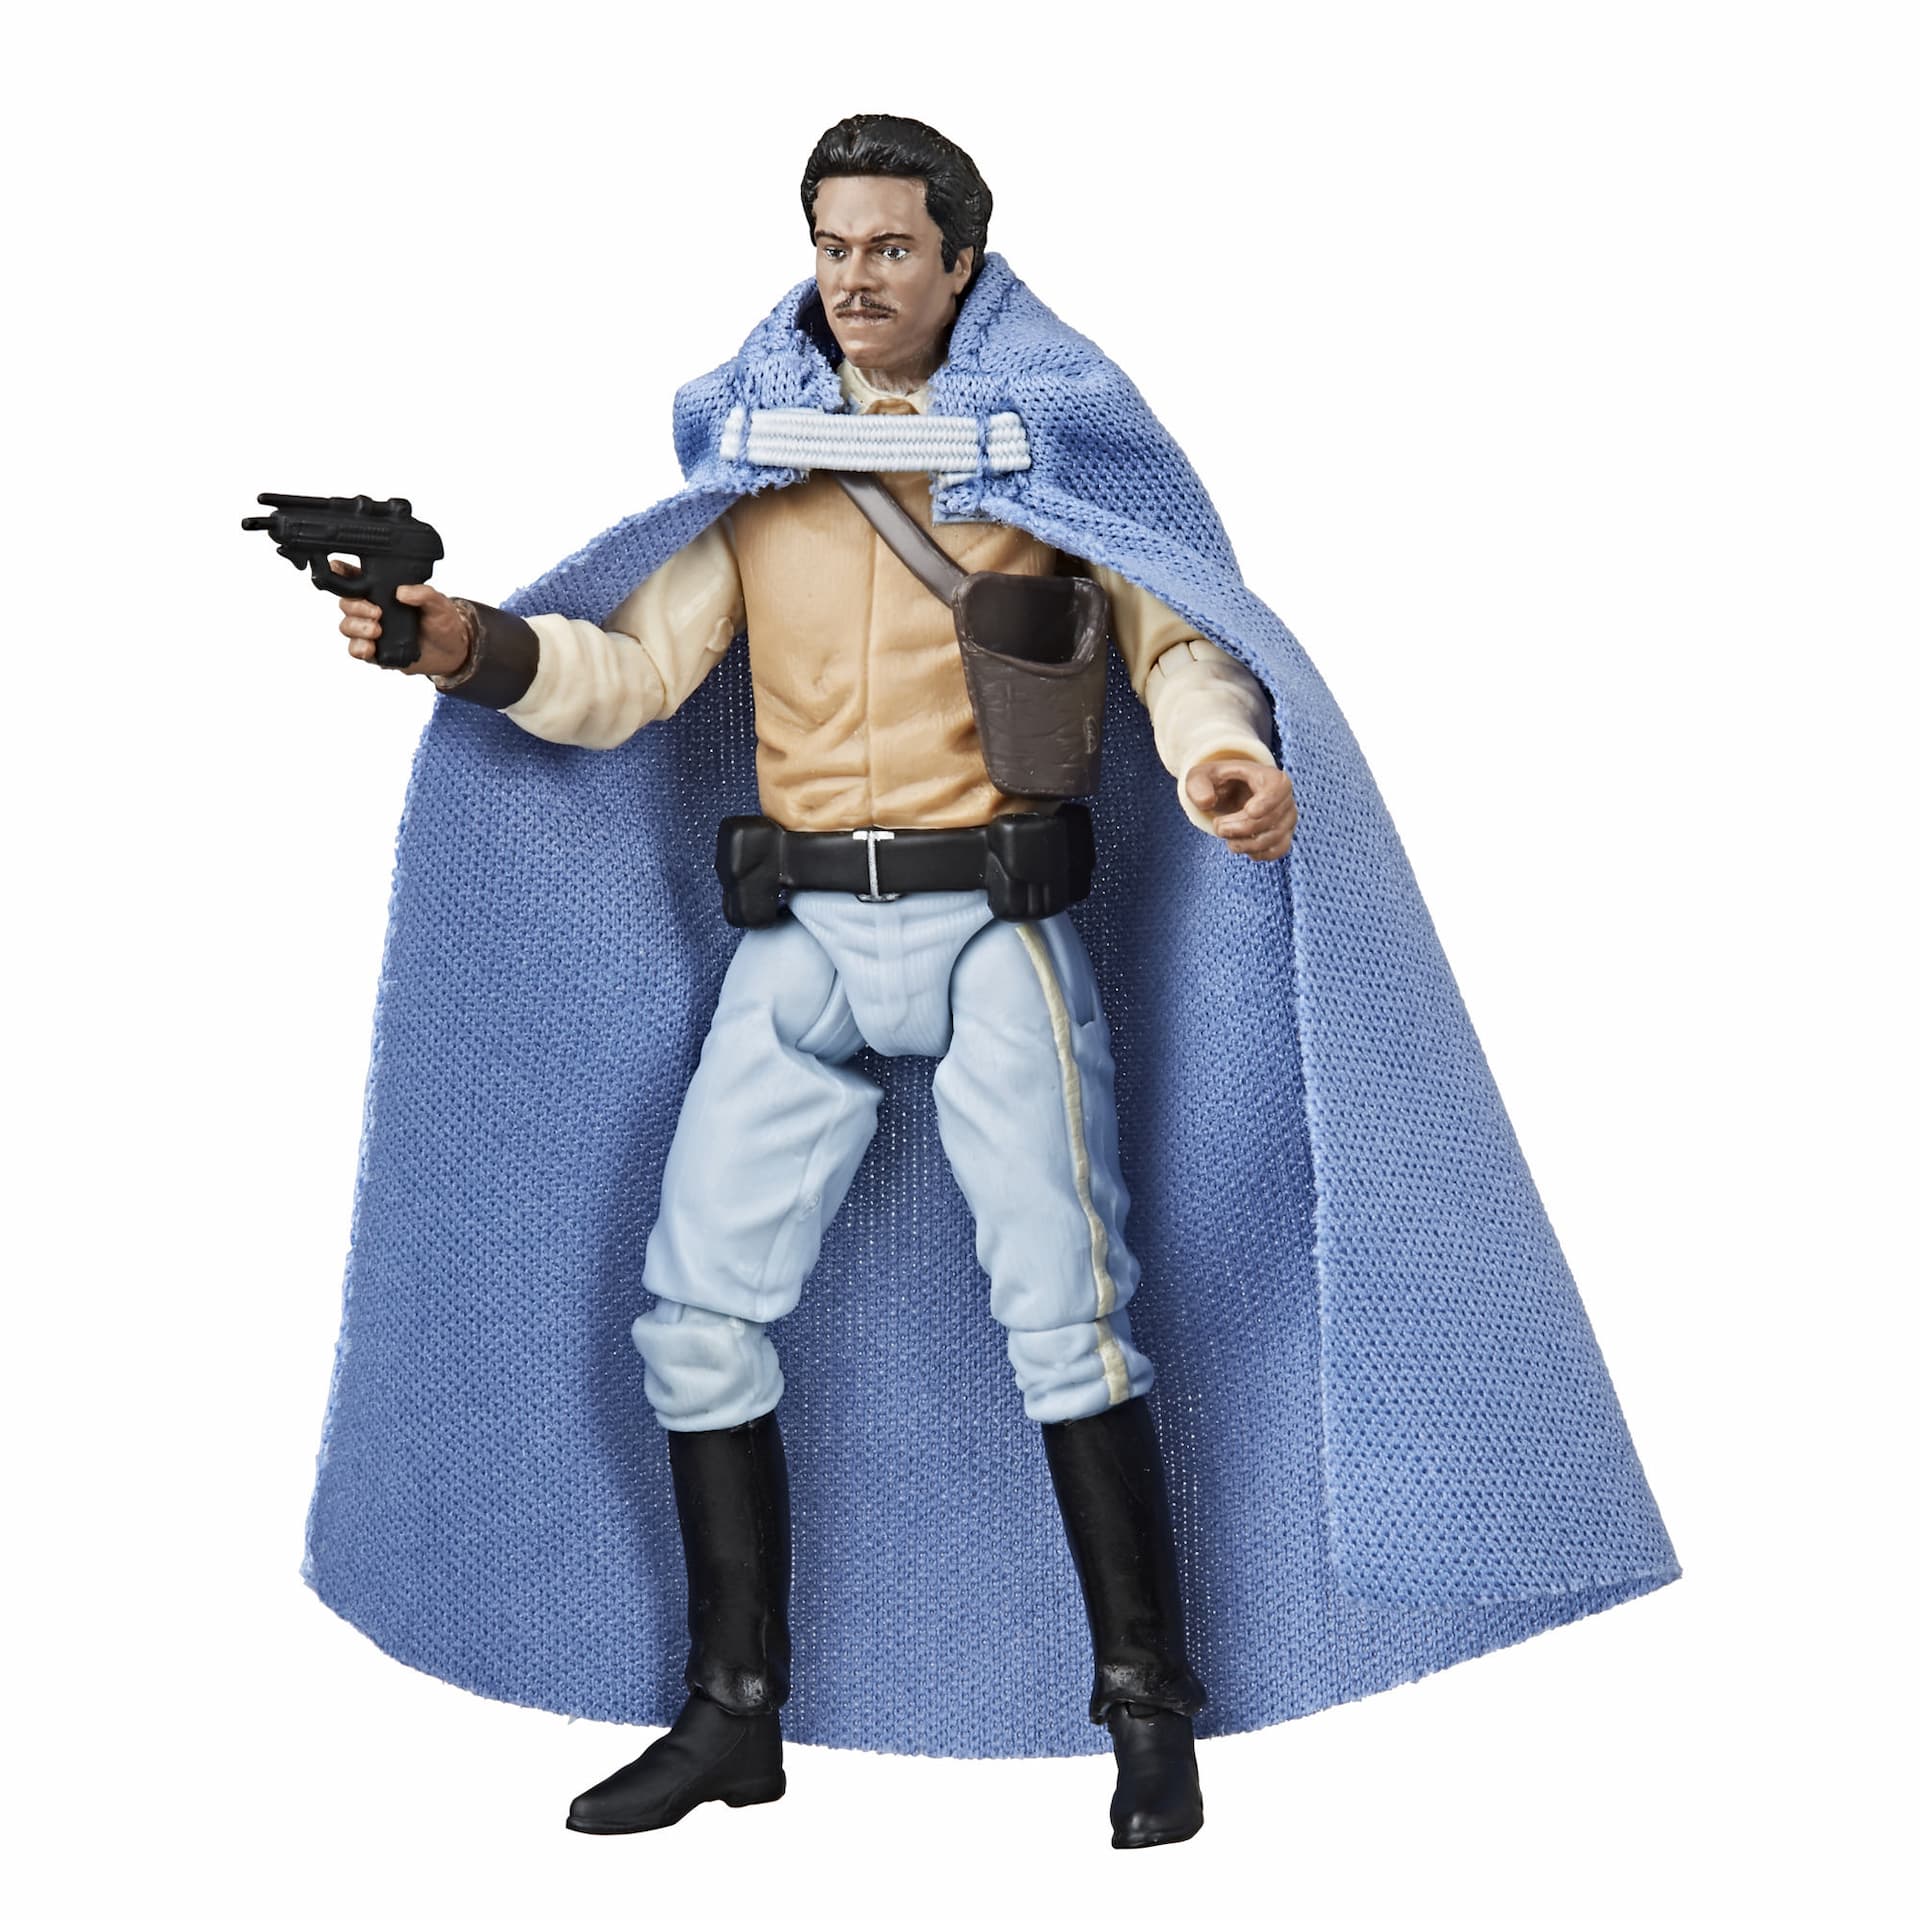 Star Wars The Vintage Collection General Lando Calrissian Toy, 3.75-inch Scale Star Wars: Return of the Jedi Figure